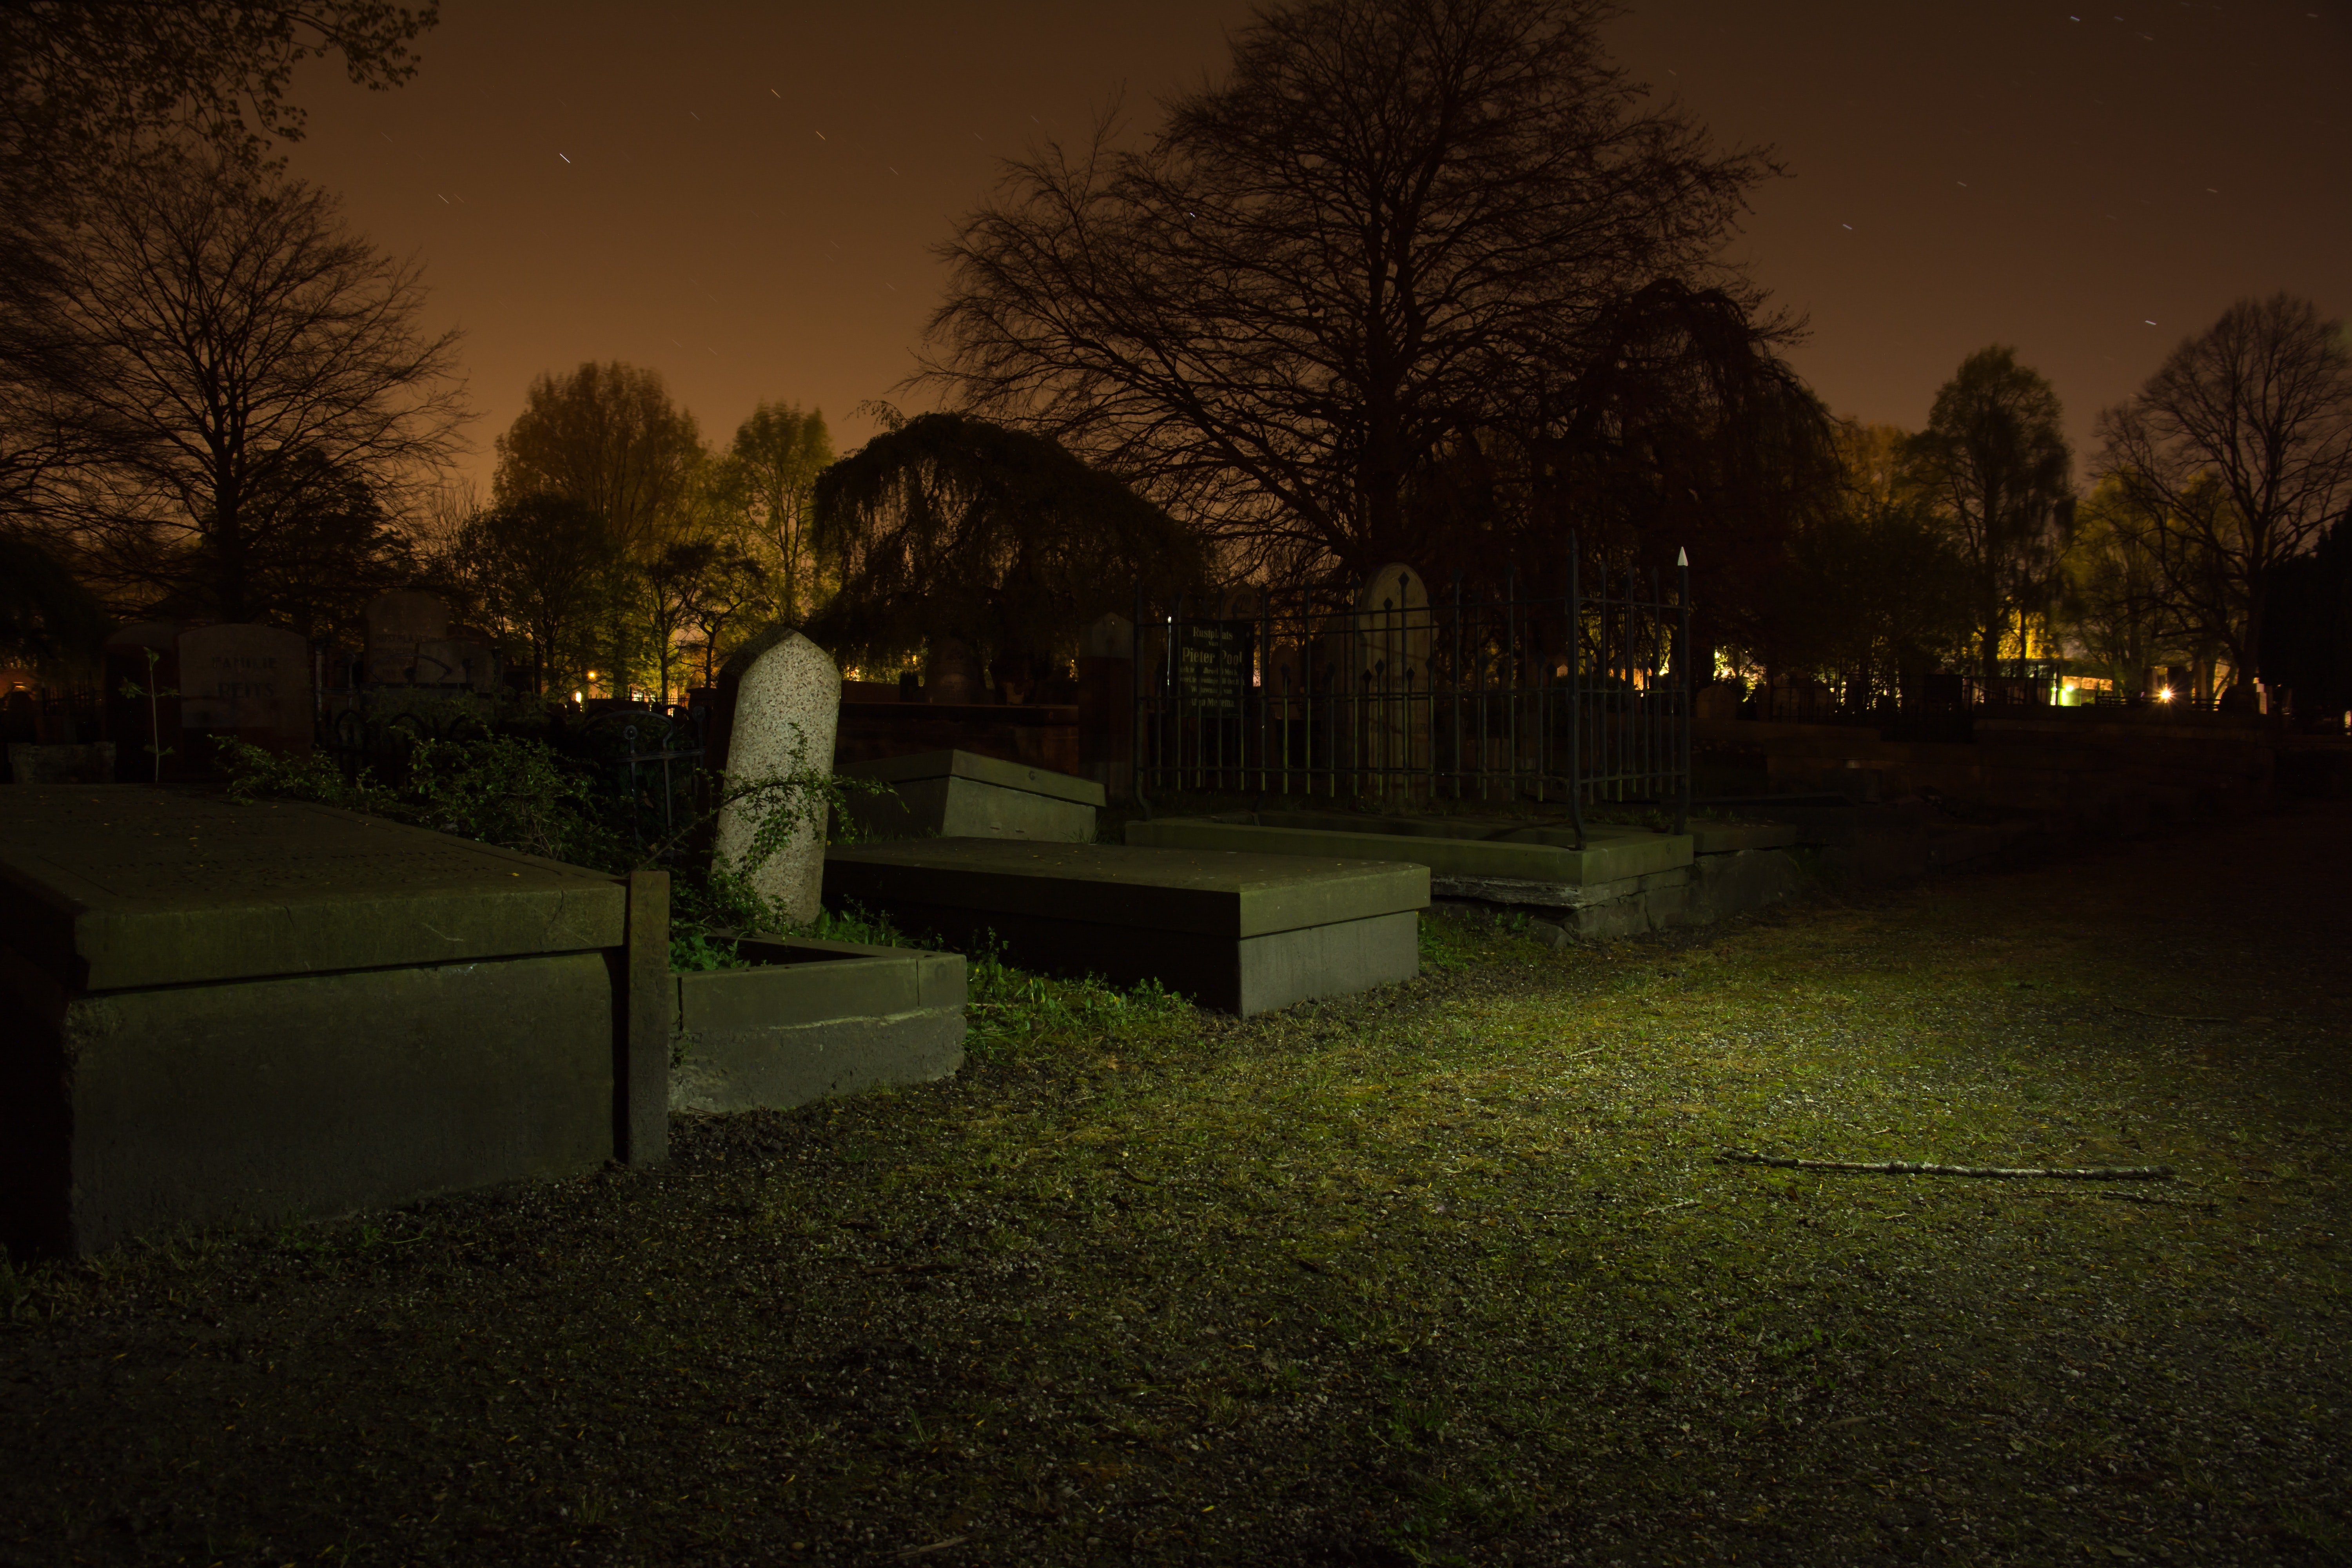 Cemetery at night. | Source: Pexels